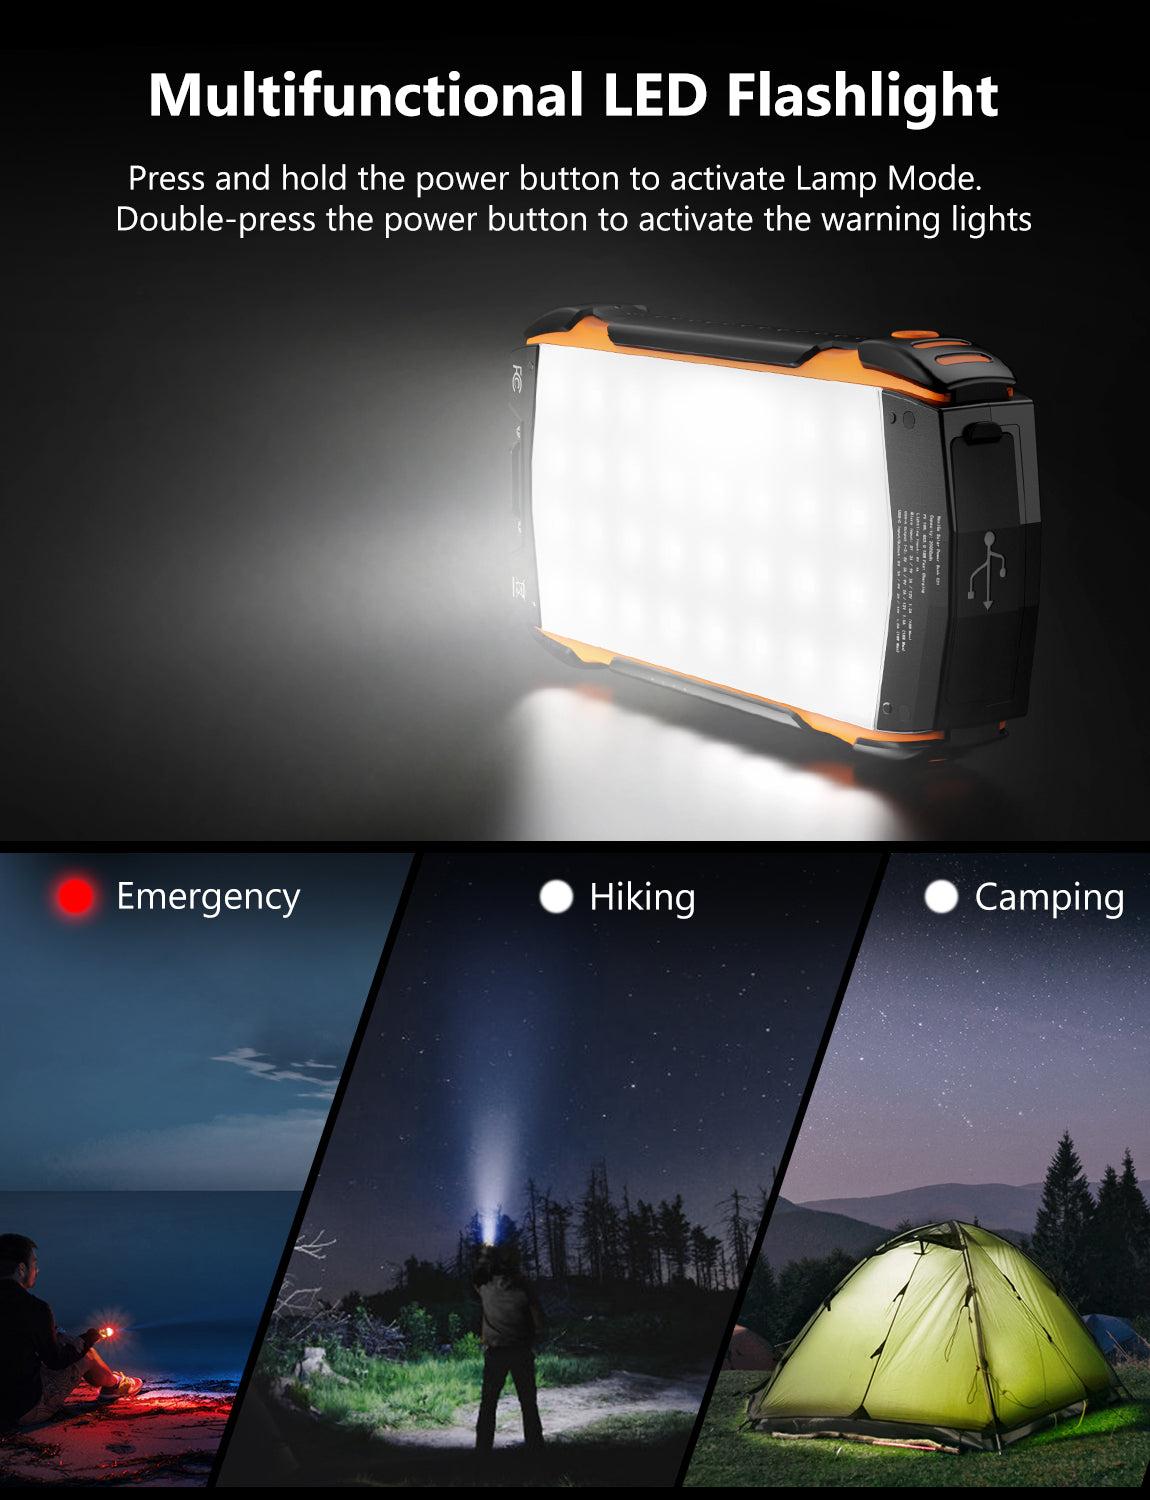 Versatile power bank for camping, hiking, and emergencies with lamp modes. 